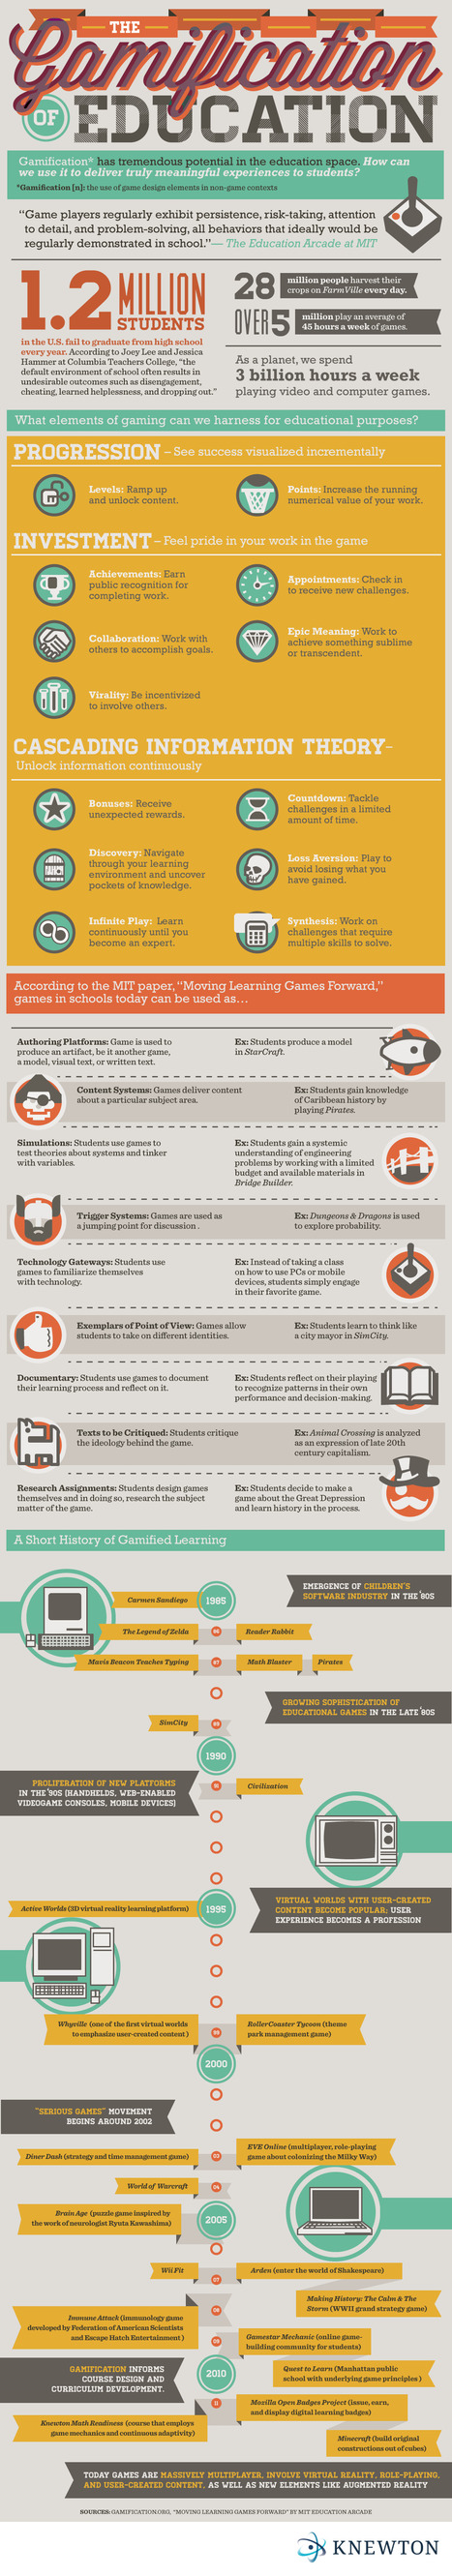 The Gamification of Education Infographic | Games, gaming and gamification in Education | Scoop.it